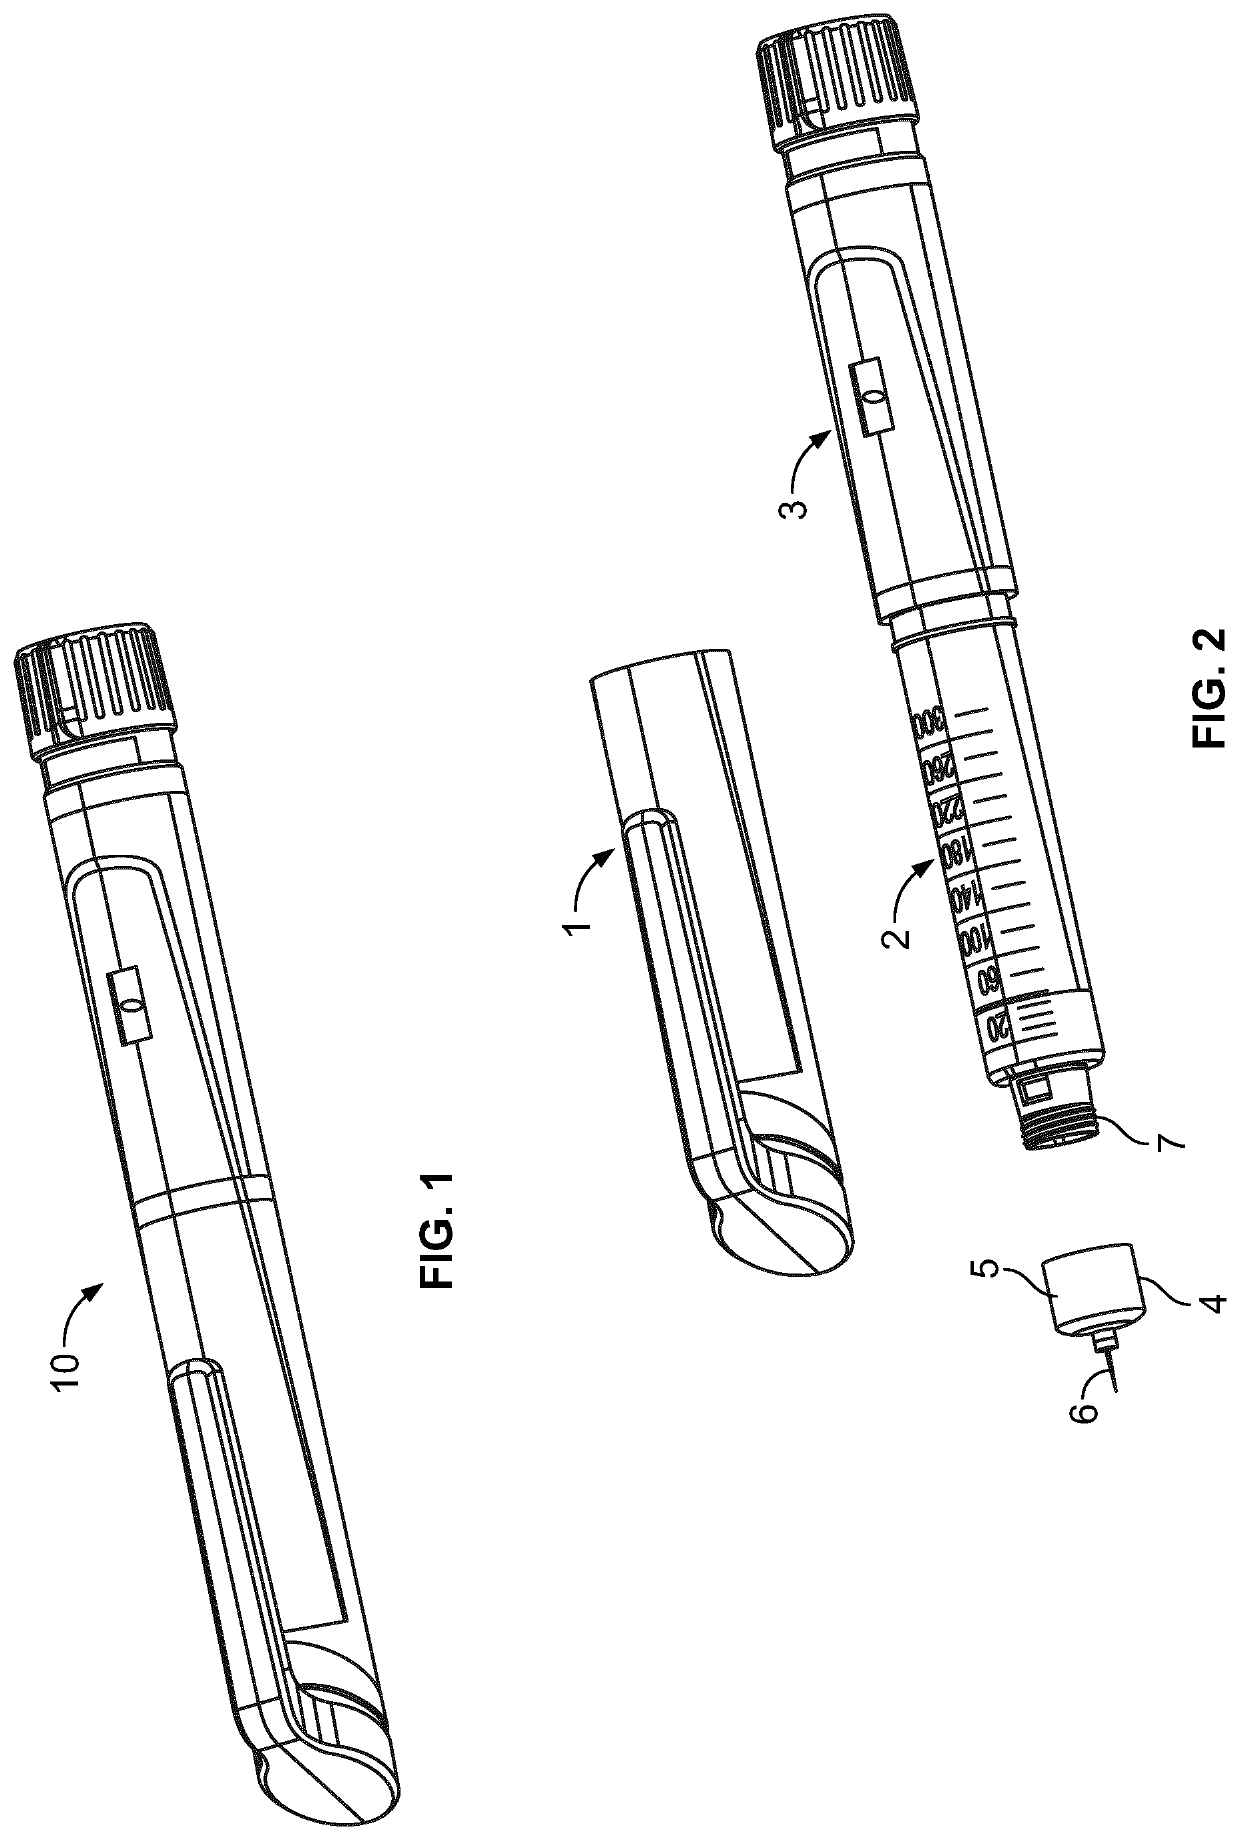 Injection device with user friendly dose selector